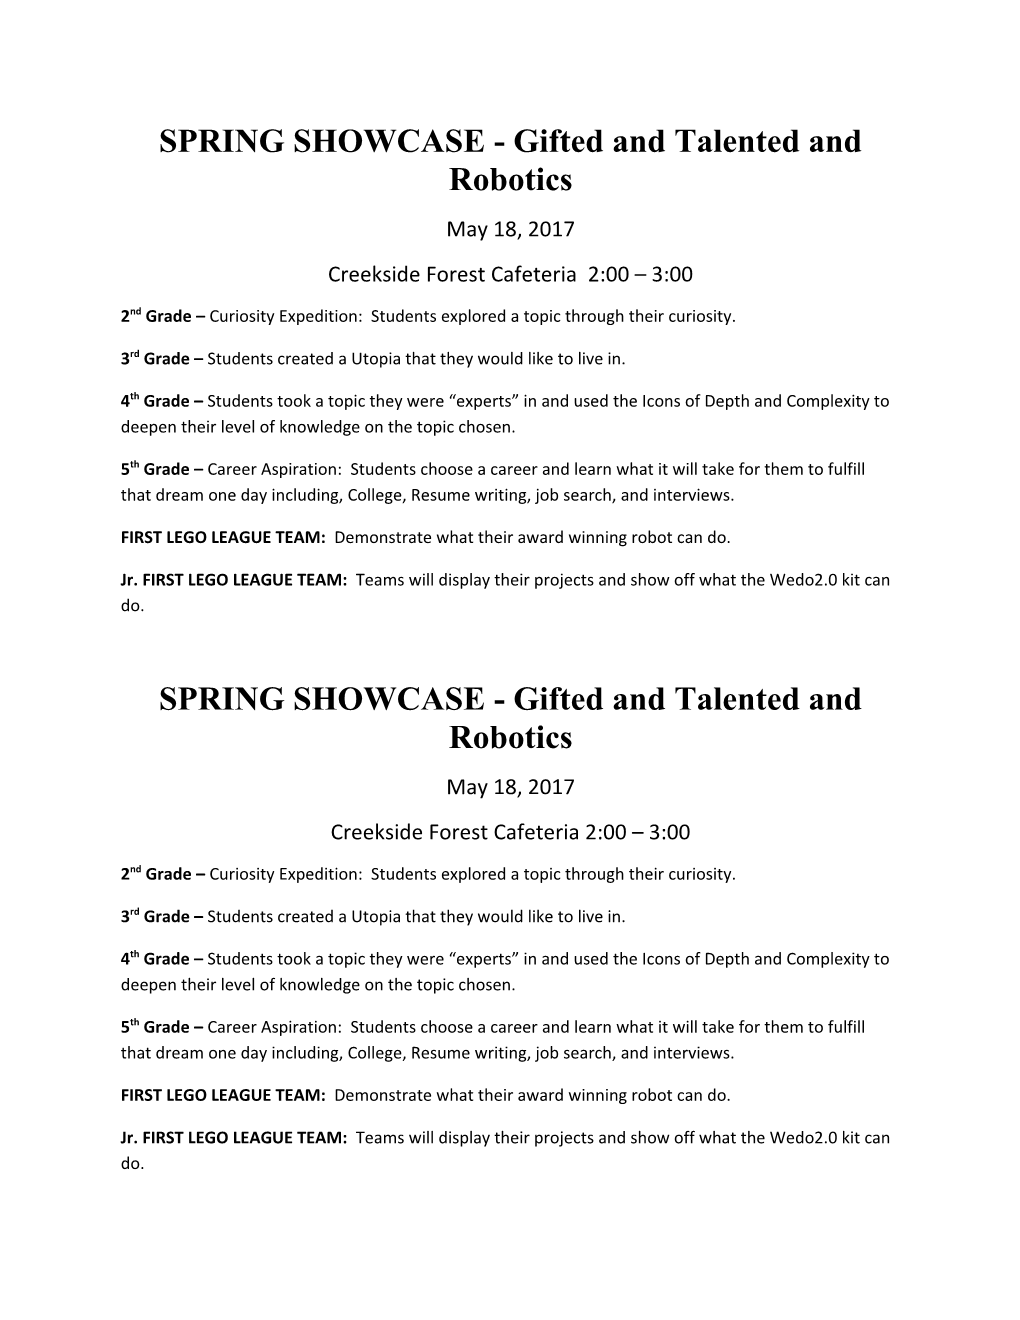 SPRING SHOWCASE - Gifted and Talented and Robotics